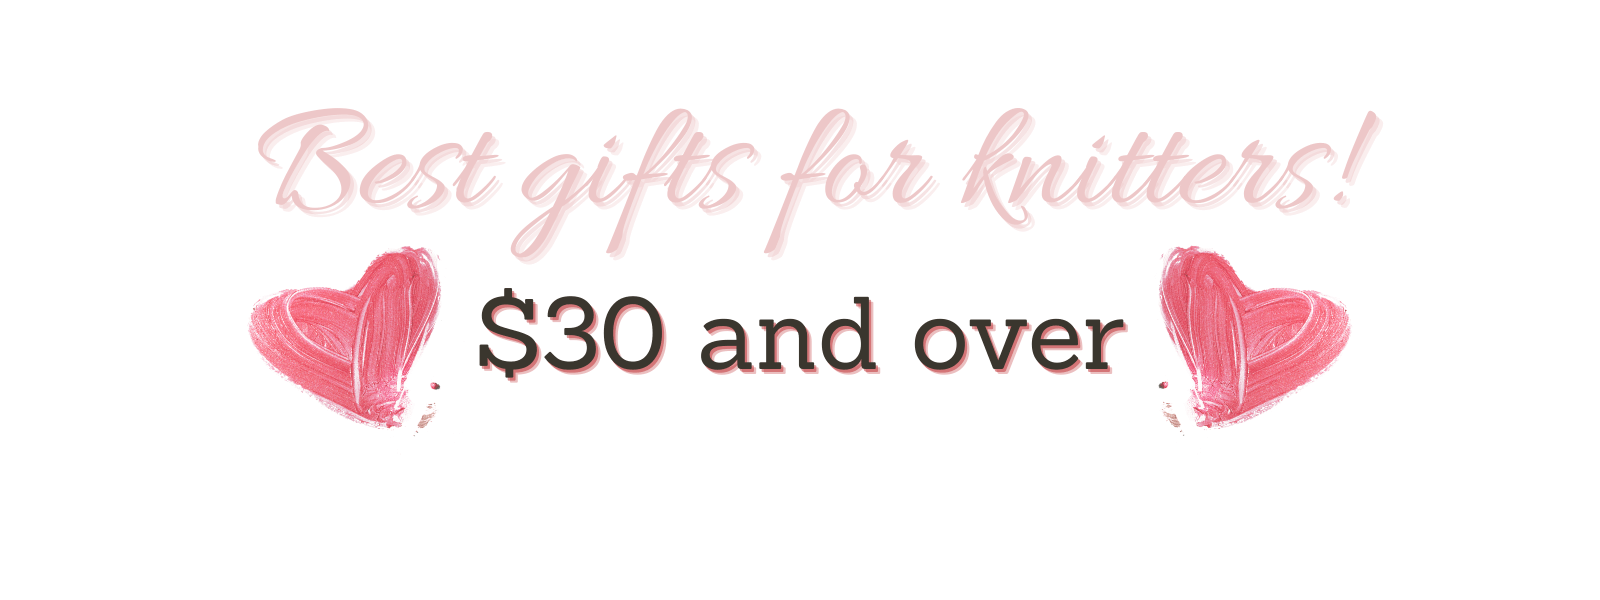 Gifts for knitters over $30